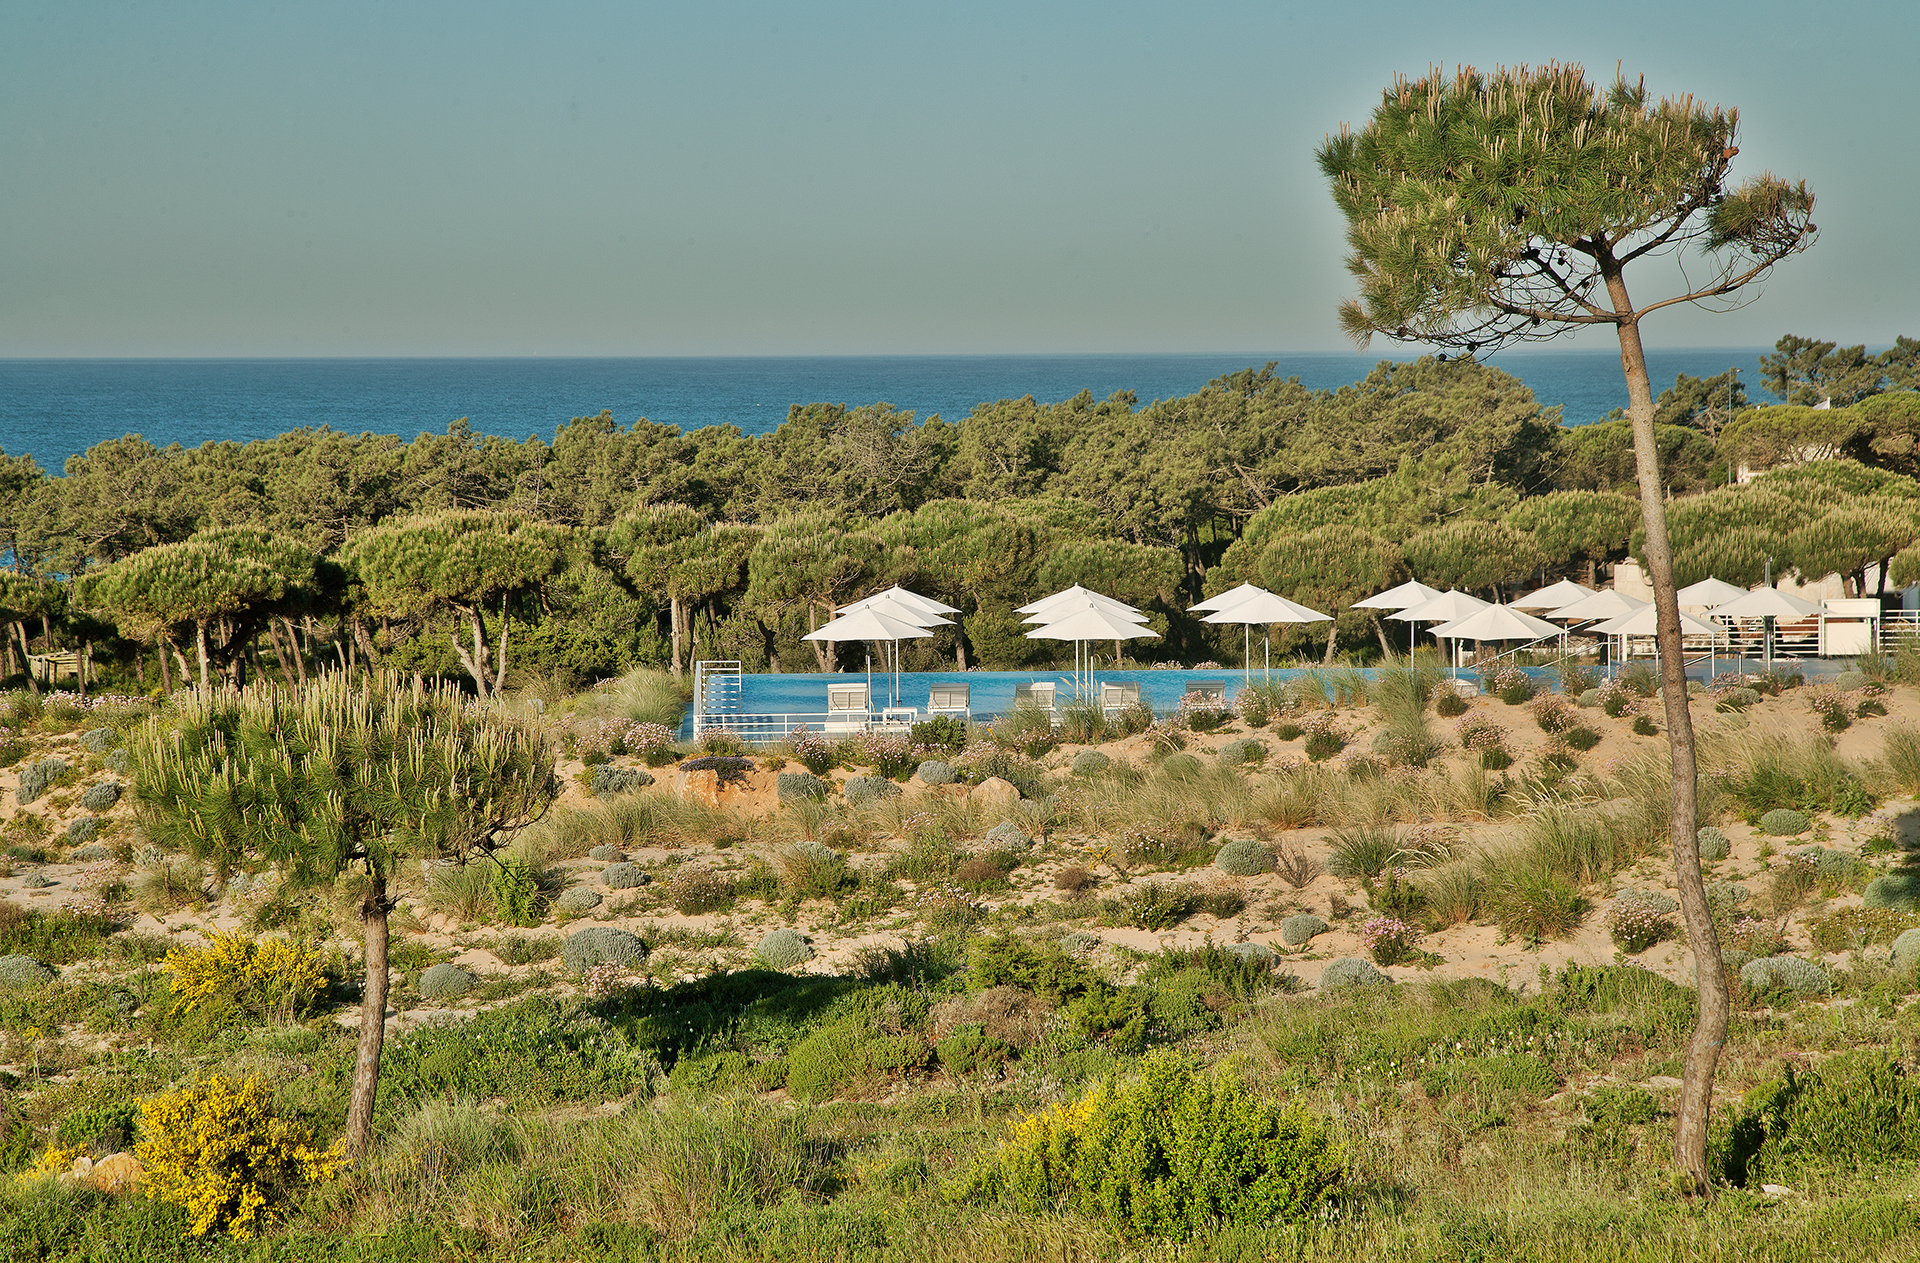 Golf-expedition-golfreizen-golfresort-Royal-The-Oitavos-Hotel-pool-and-nature-view